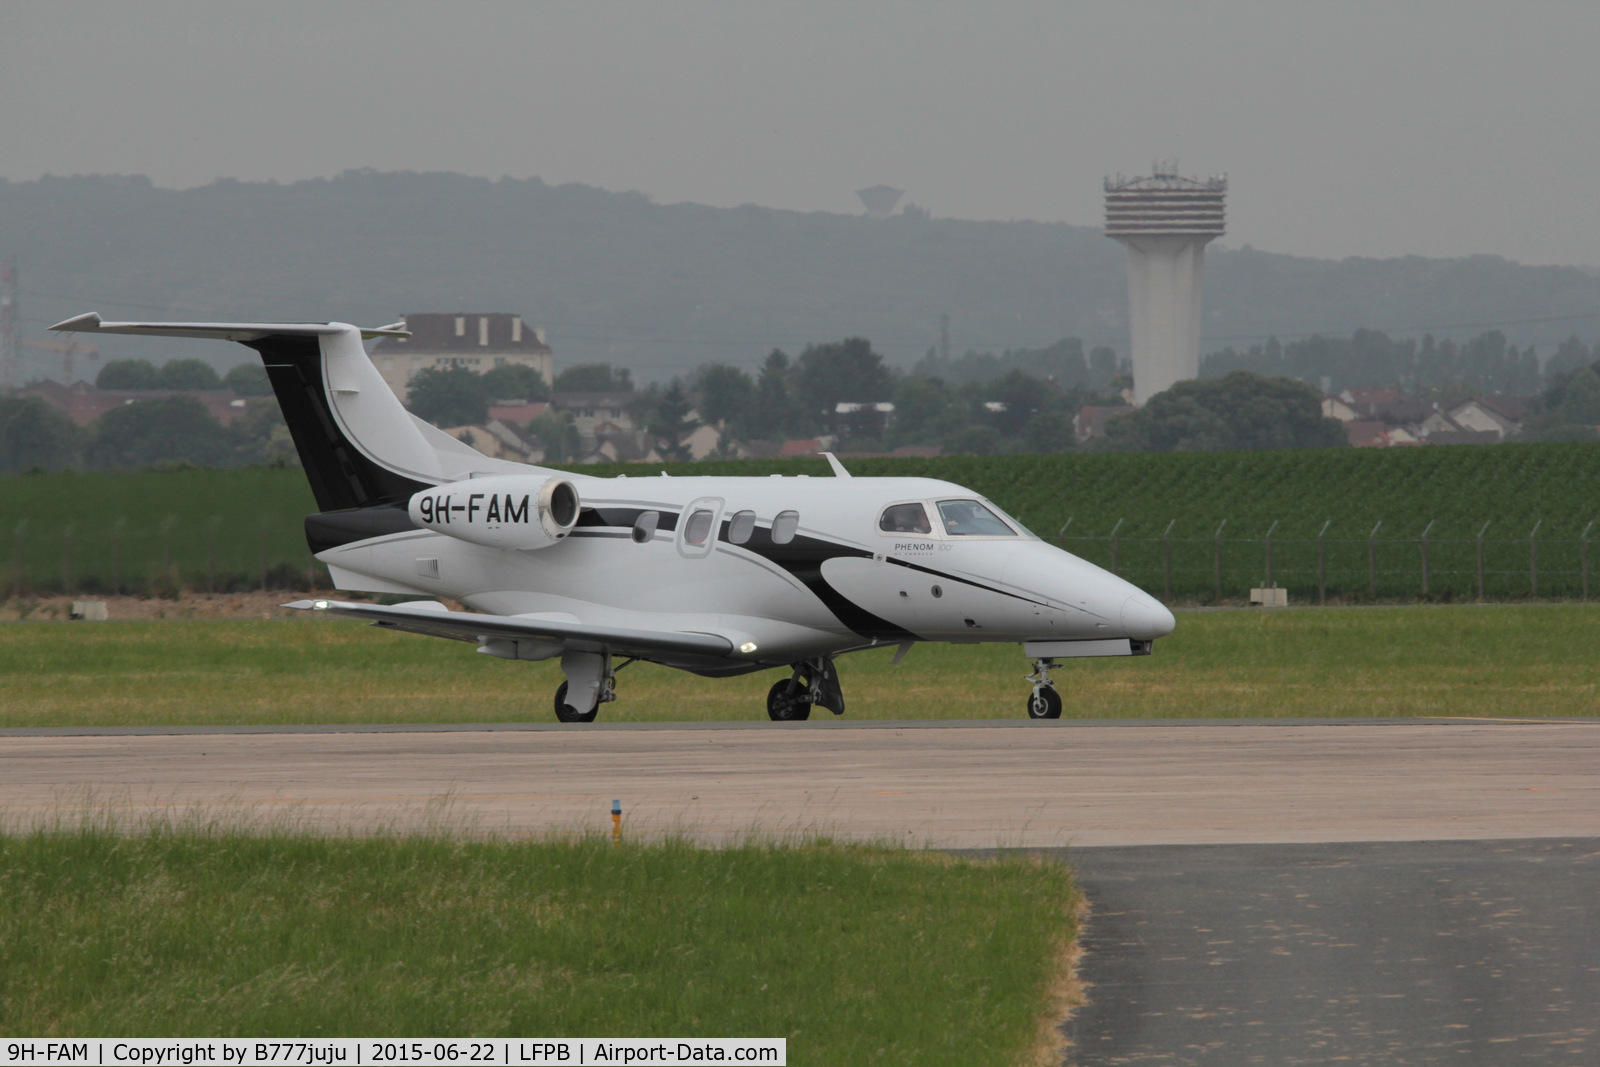 9H-FAM, 2009 Embraer EMB-500 Phenom 100 C/N 50000100, at Le Bourget